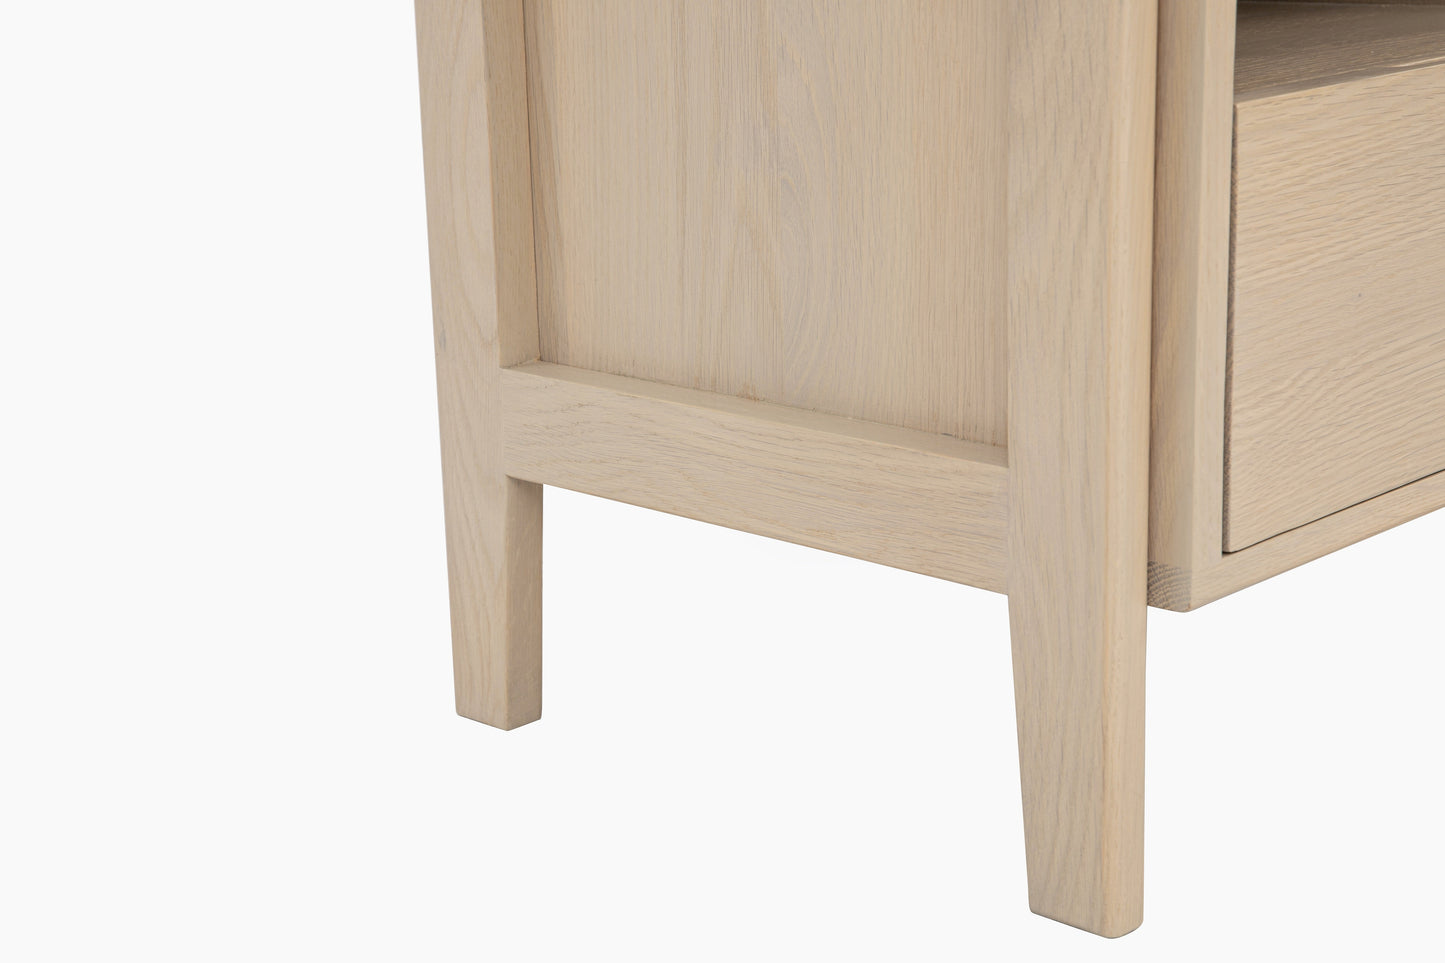 Plume Nightstand Bedside Tables in Nude/18"